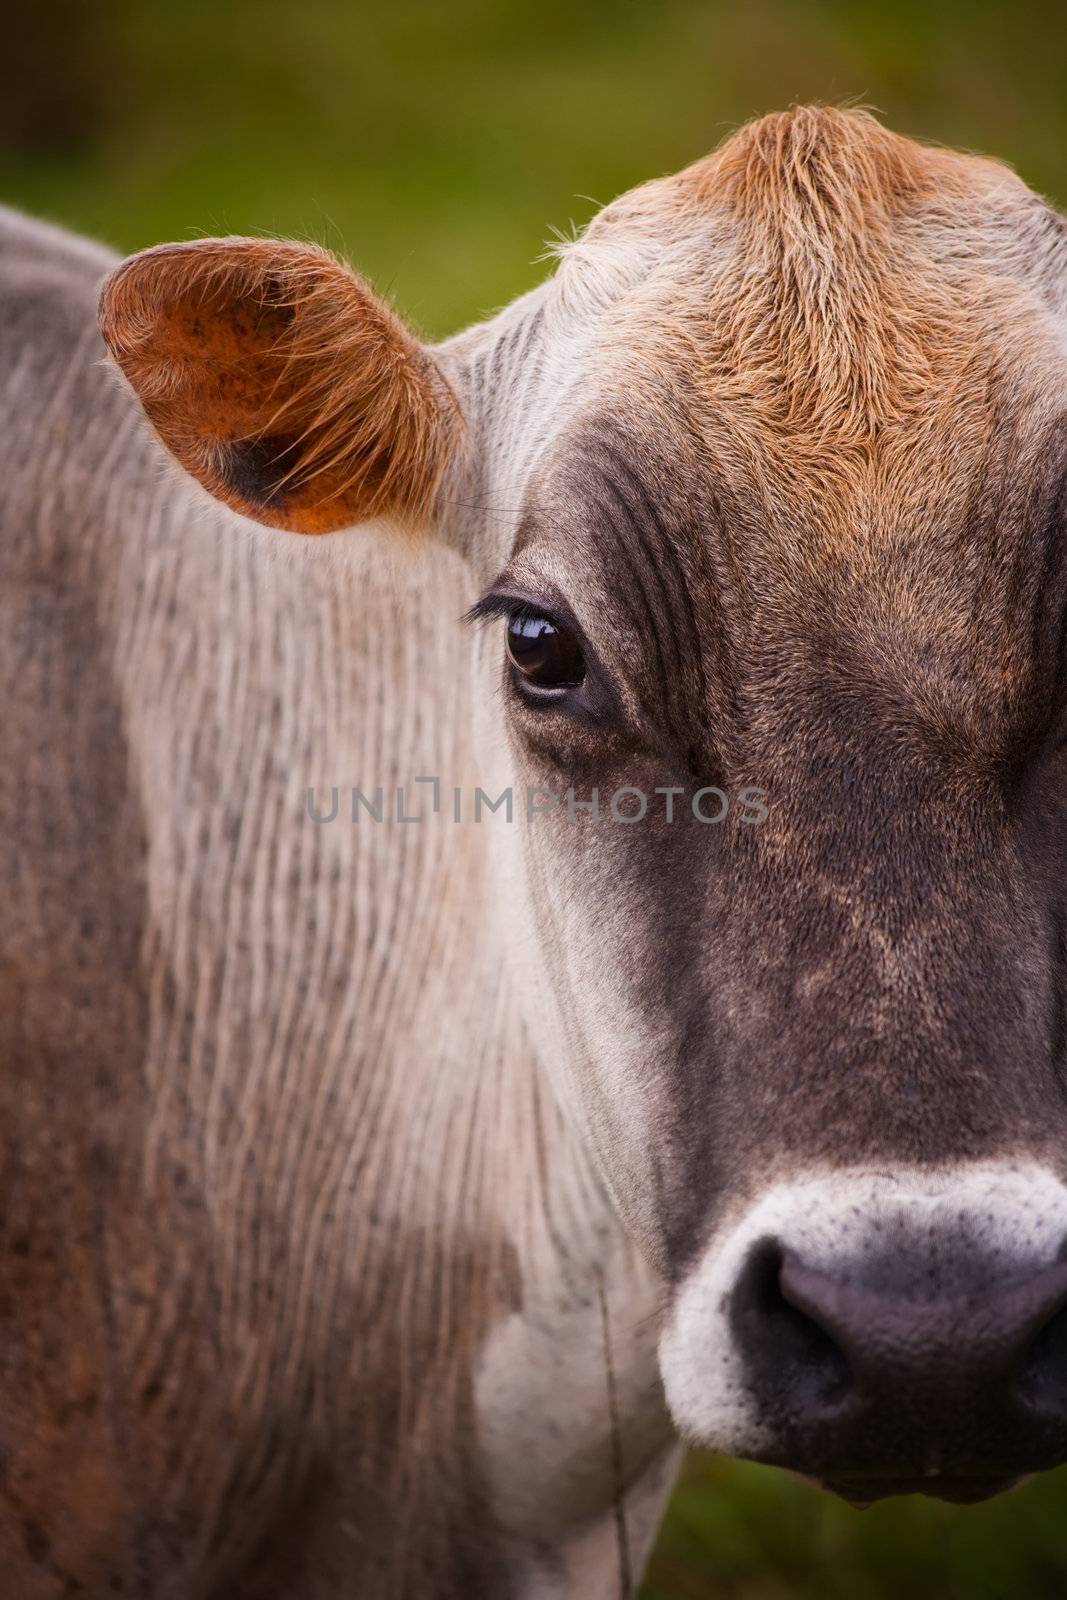 Closeup on the eye of a cow in Costa Rica